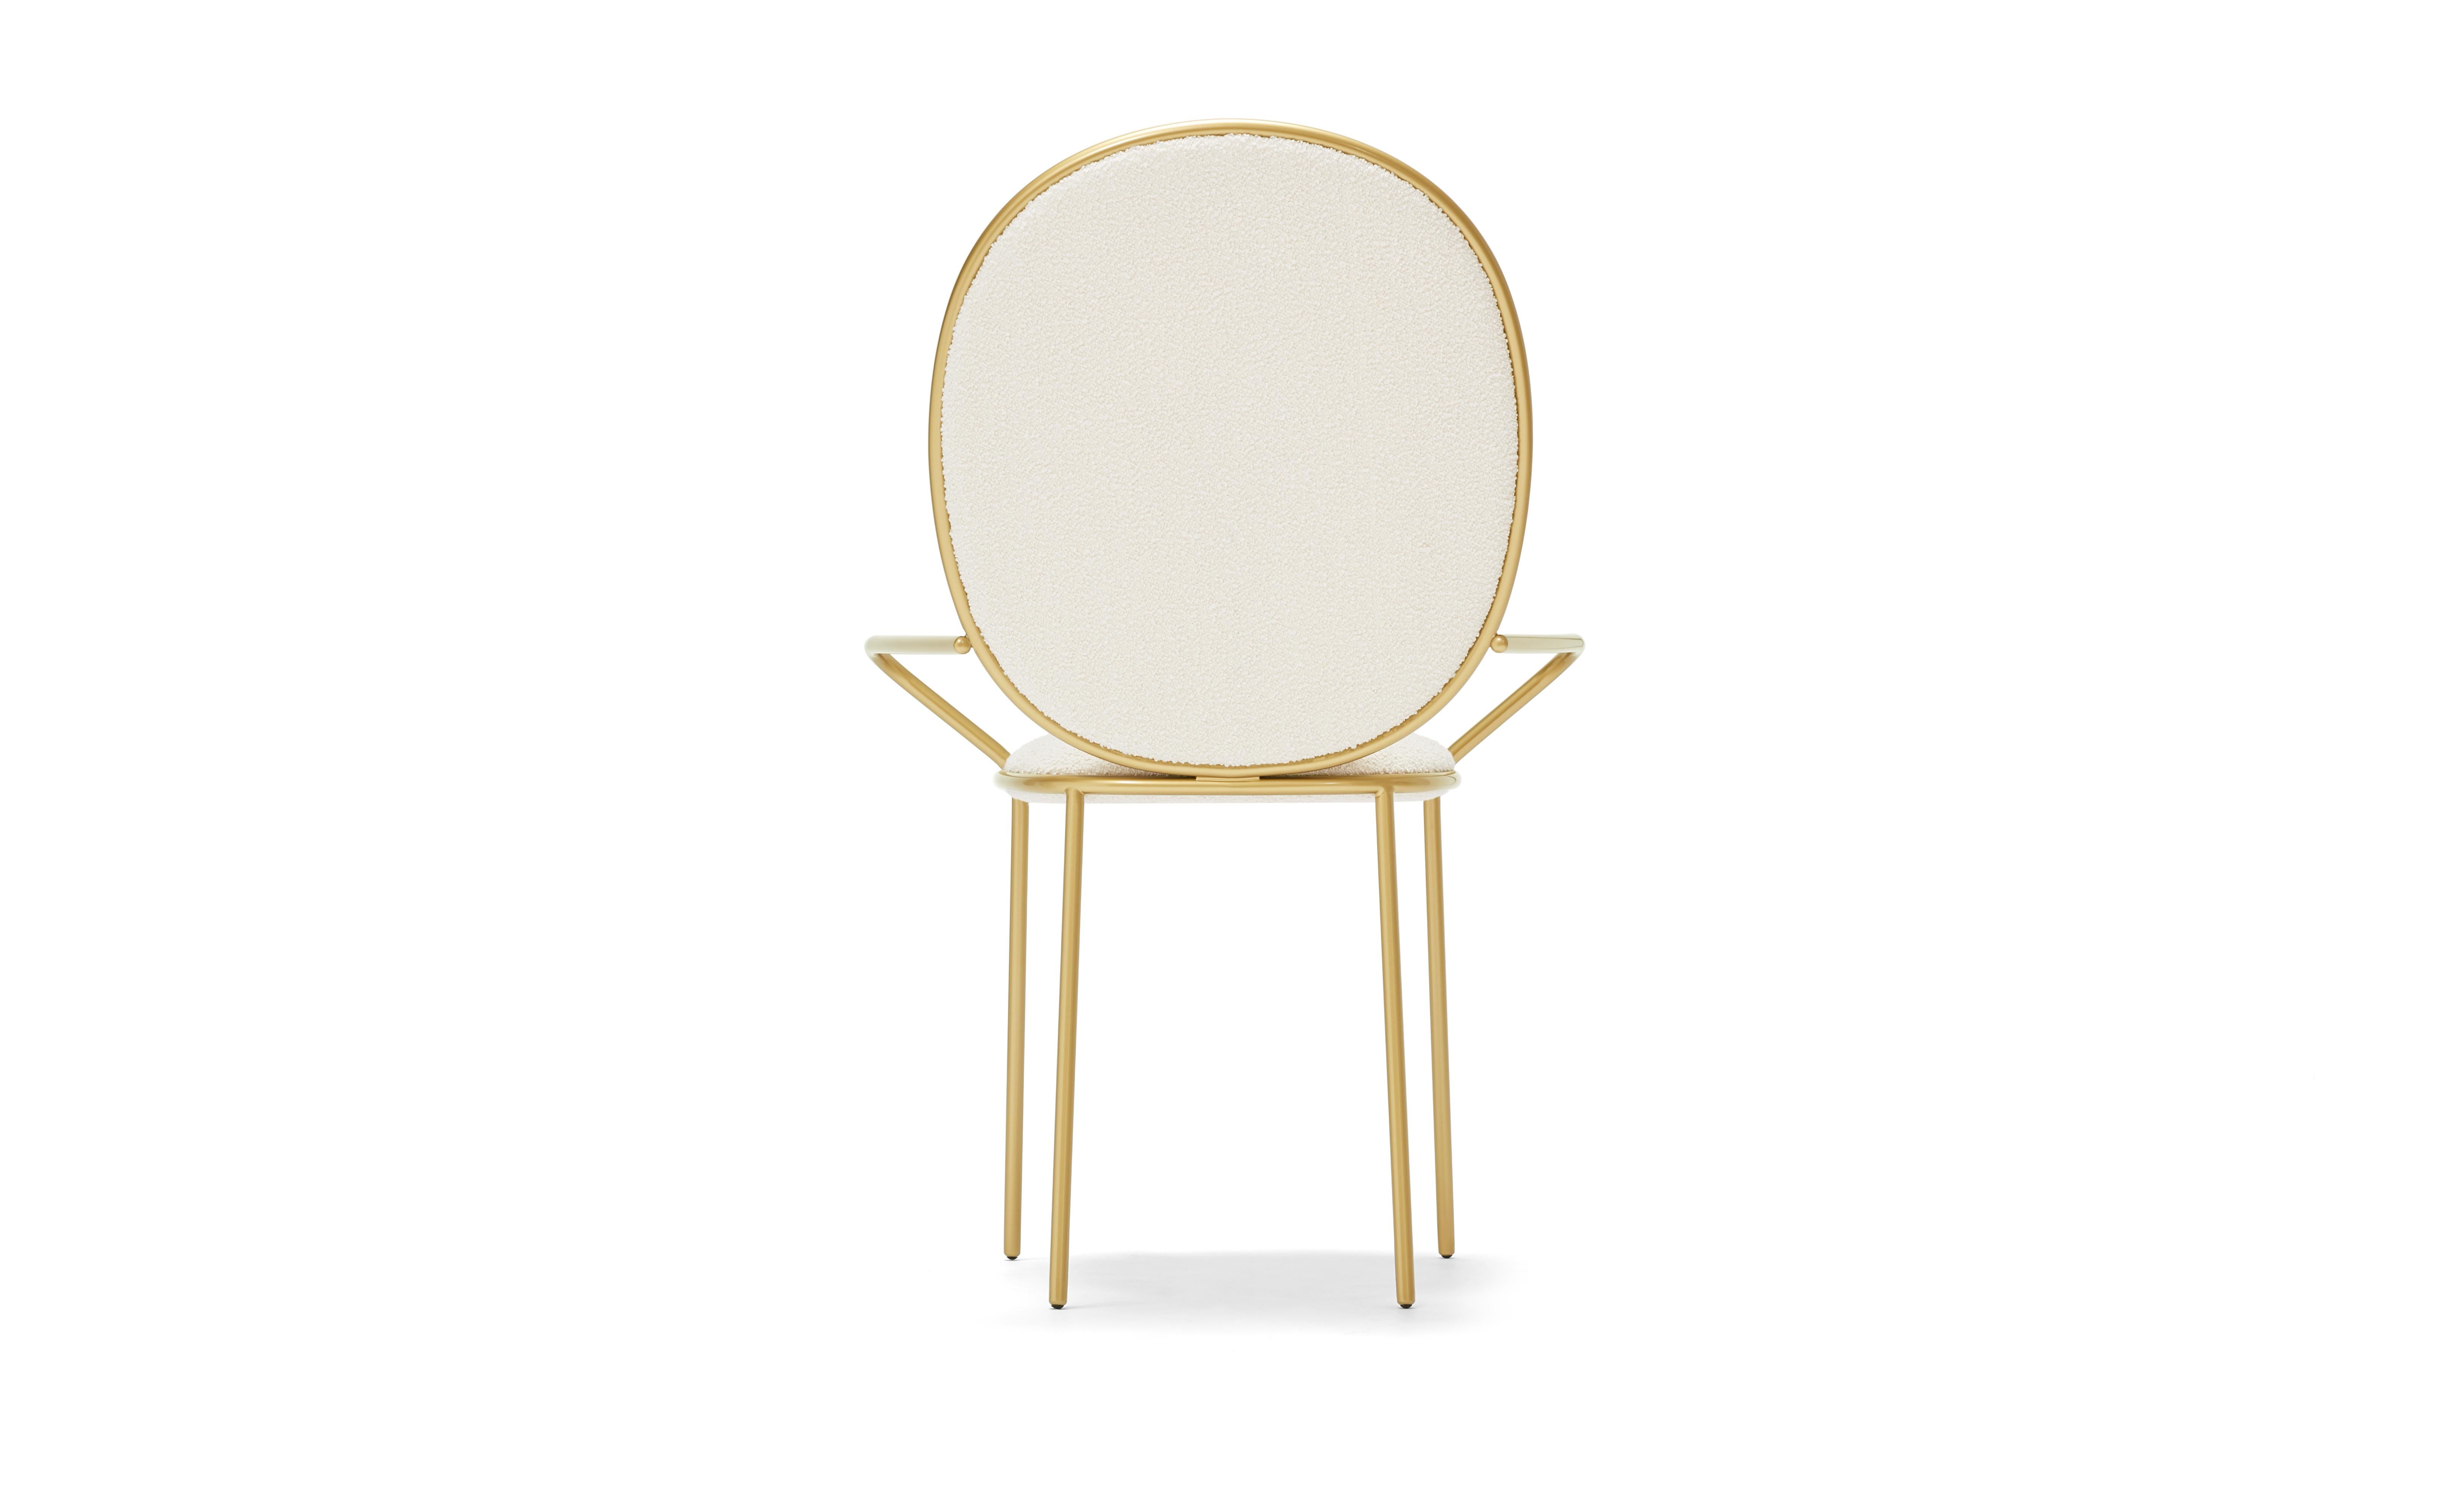 Slovenian Contemporary Ivory Upholstered Dining Armchair, Stay by Nika Zupanc